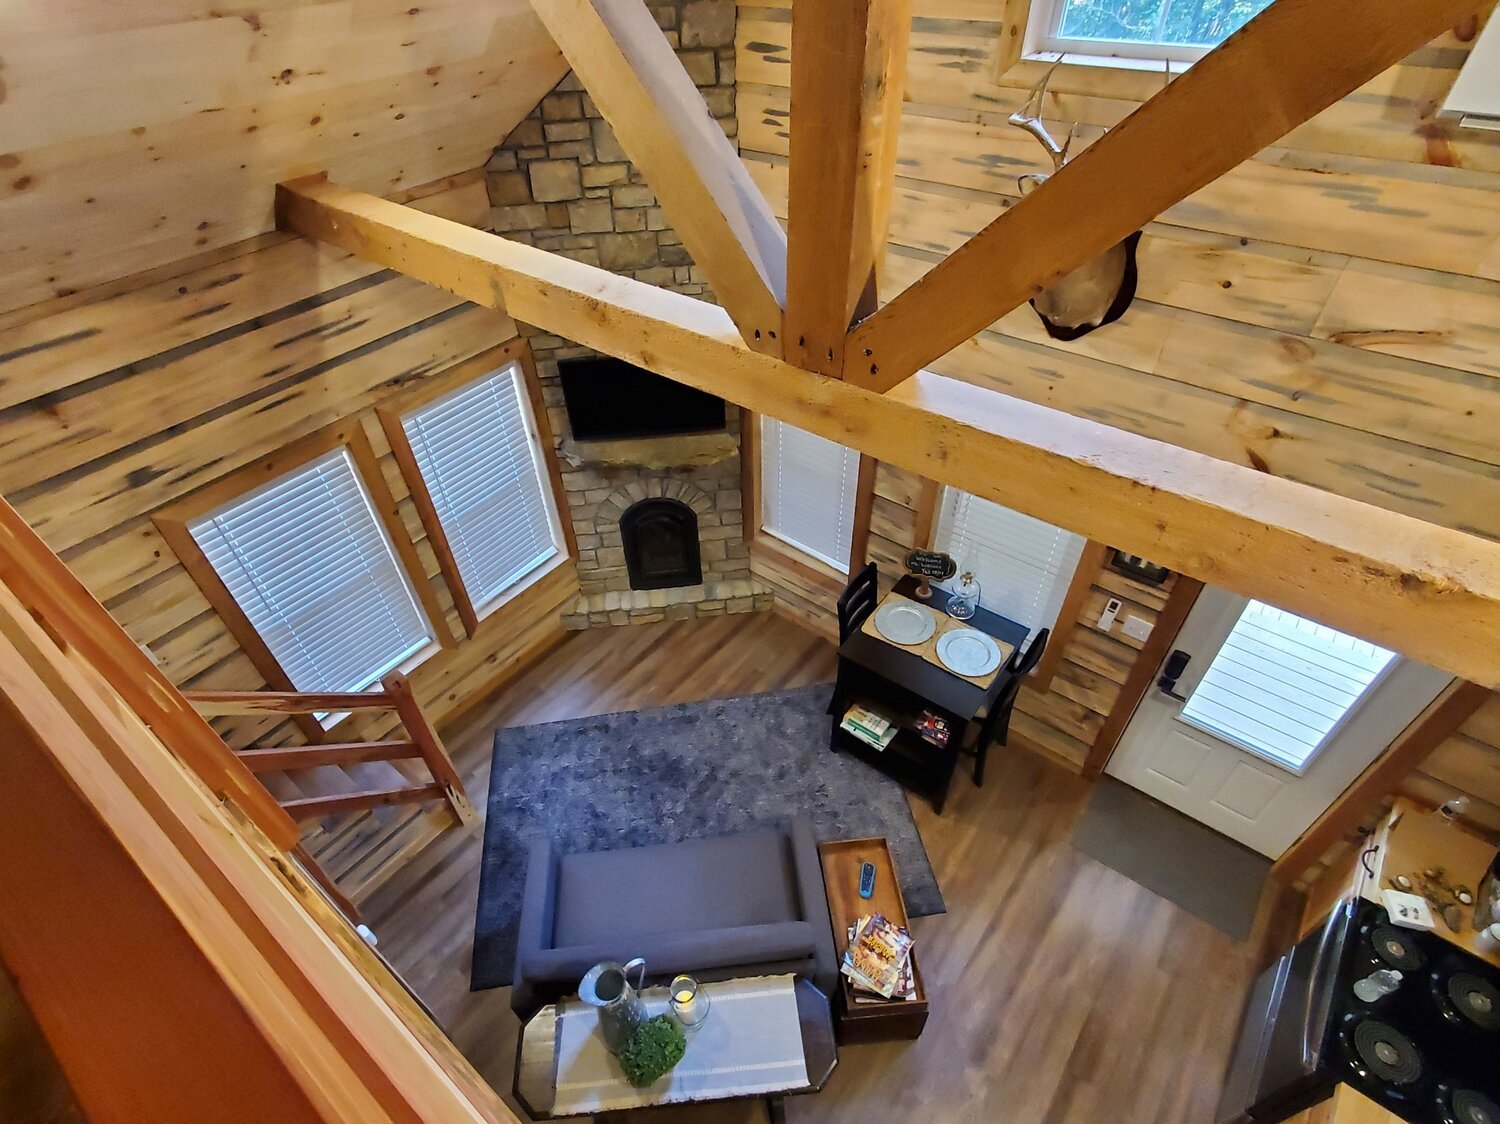  At the beginning of the pandemic, Eric’s chiropractic practice closed for a while, and he took advantage of the time to finish up their cabins. They are renting out all three of them year round now, check them out on Vrbo:   Cozy Cottage in the Wood